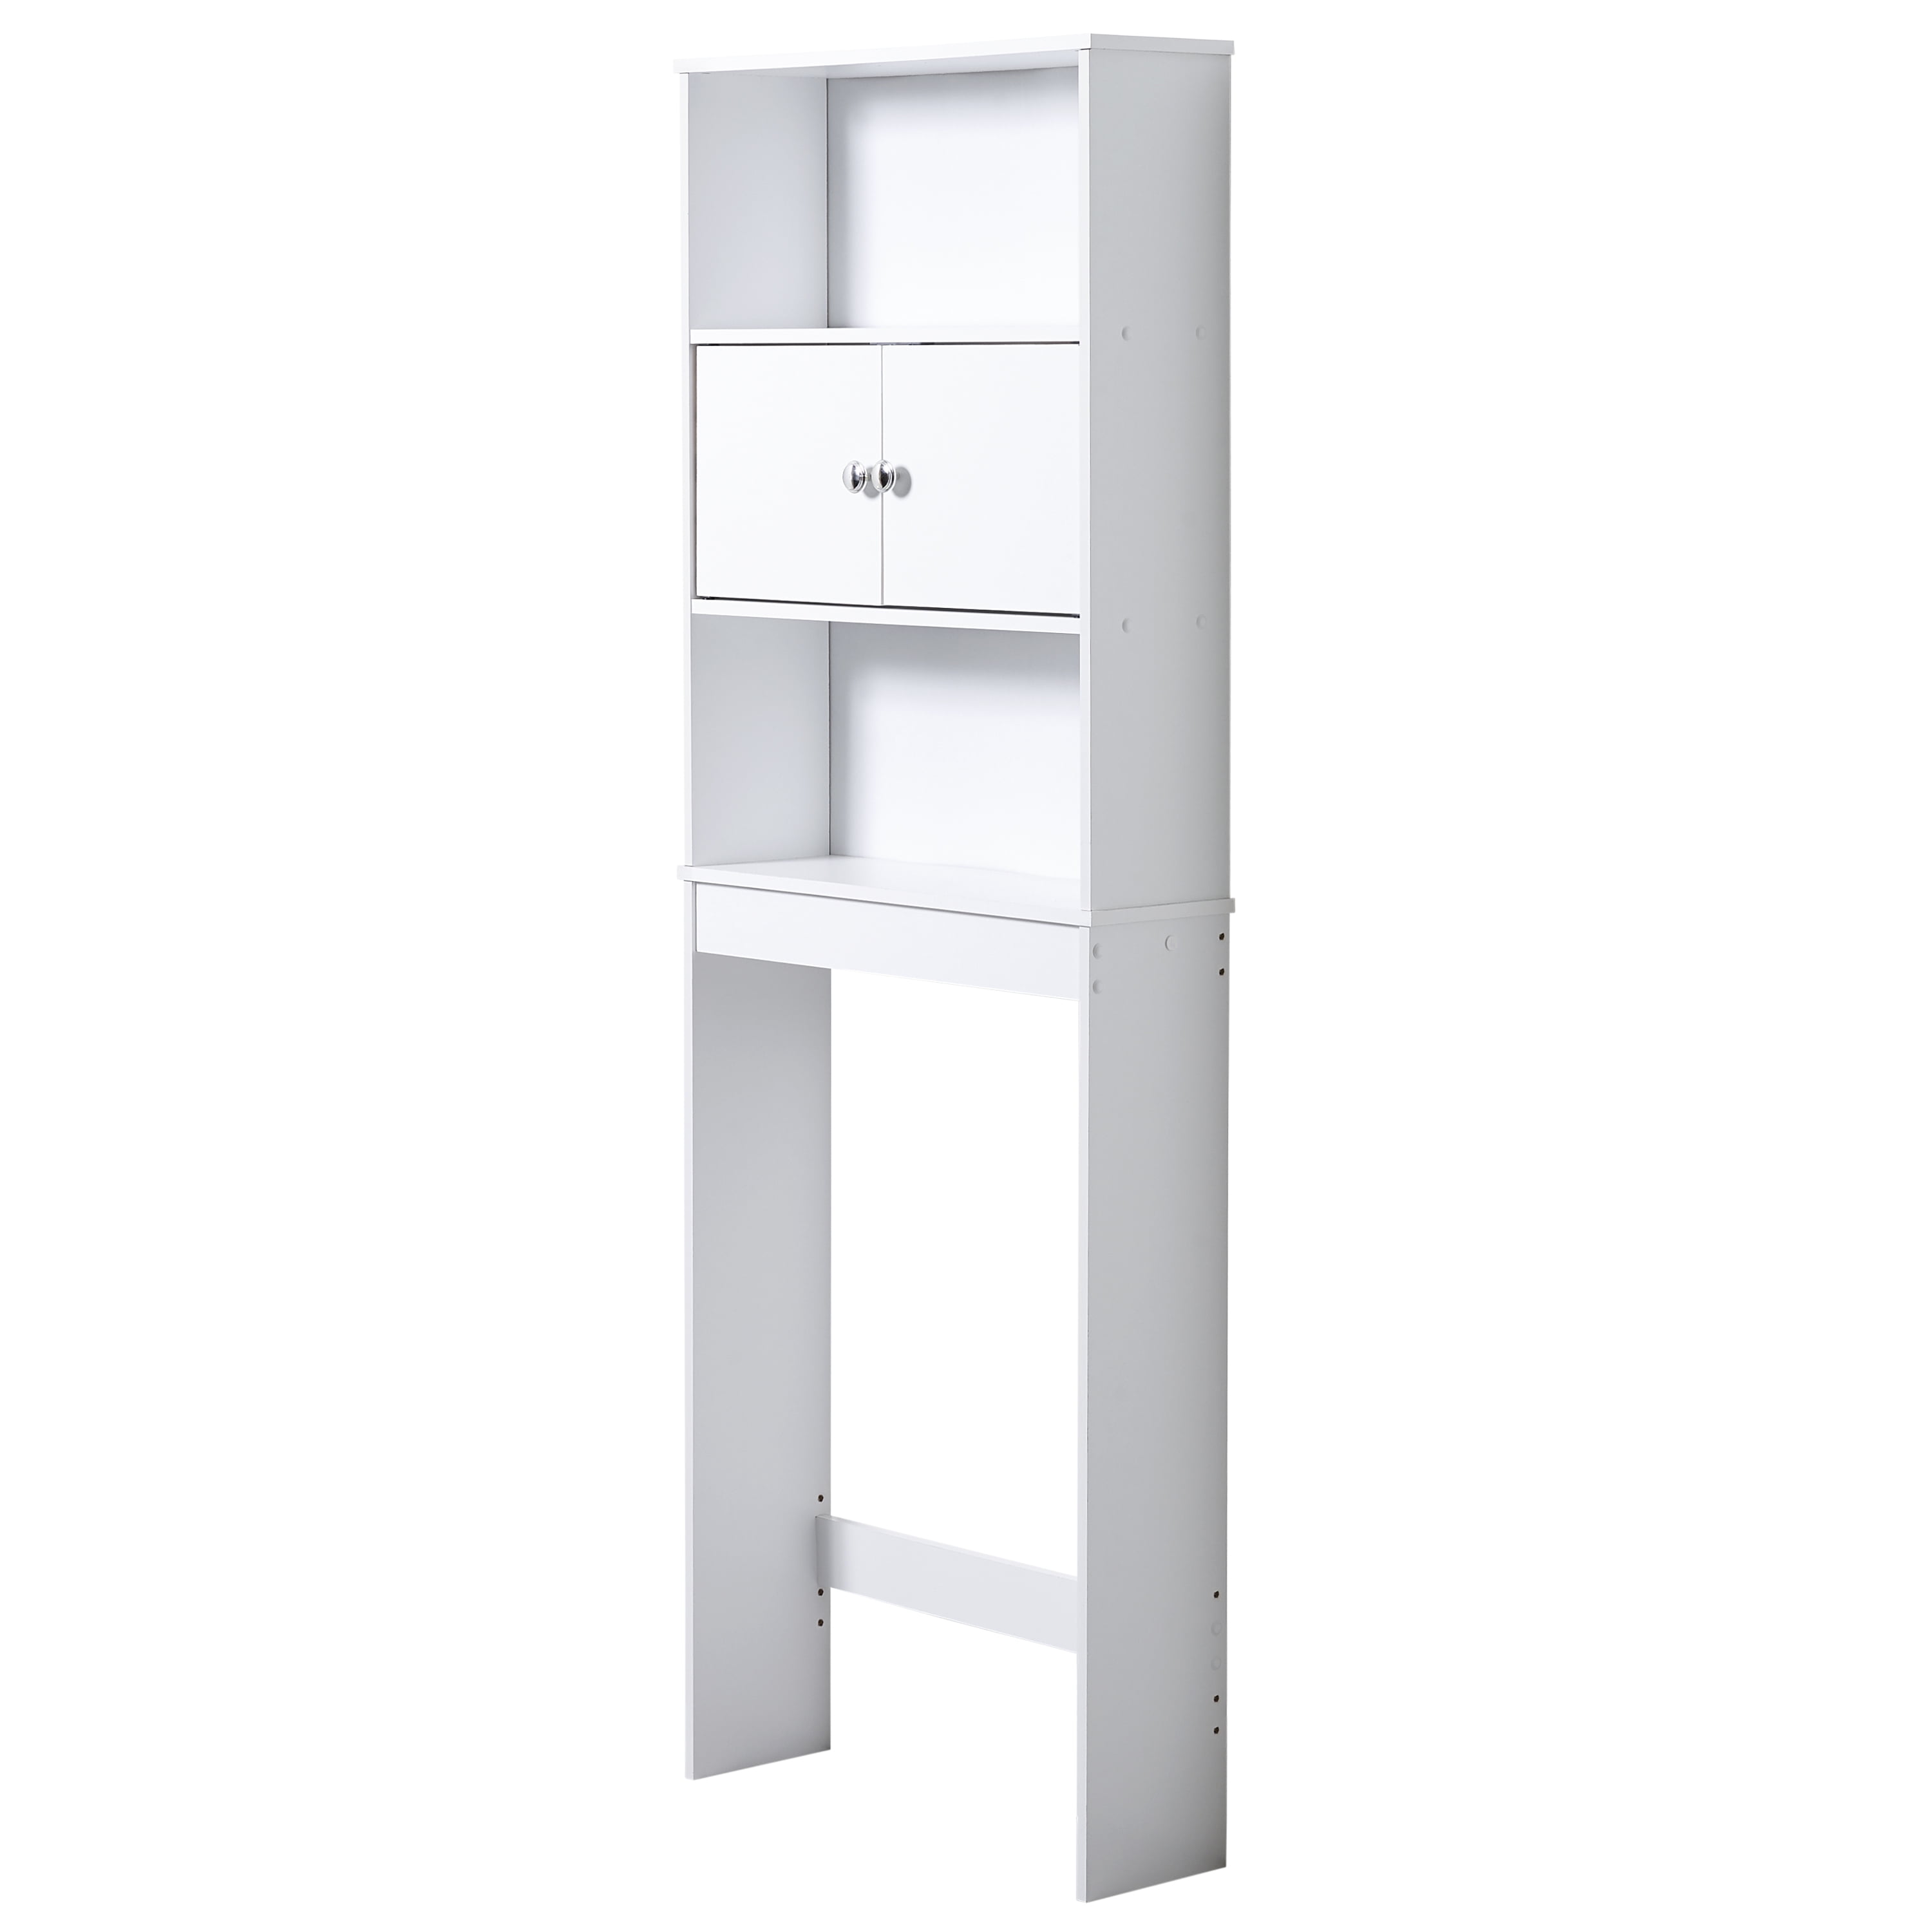 25 in. W x 77 in. H x 7.9 in. D Matte White Bathroom Over-The-Toilet Storage  Cabinet Organizer with Doors and Shelves GM-H-987 - The Home Depot